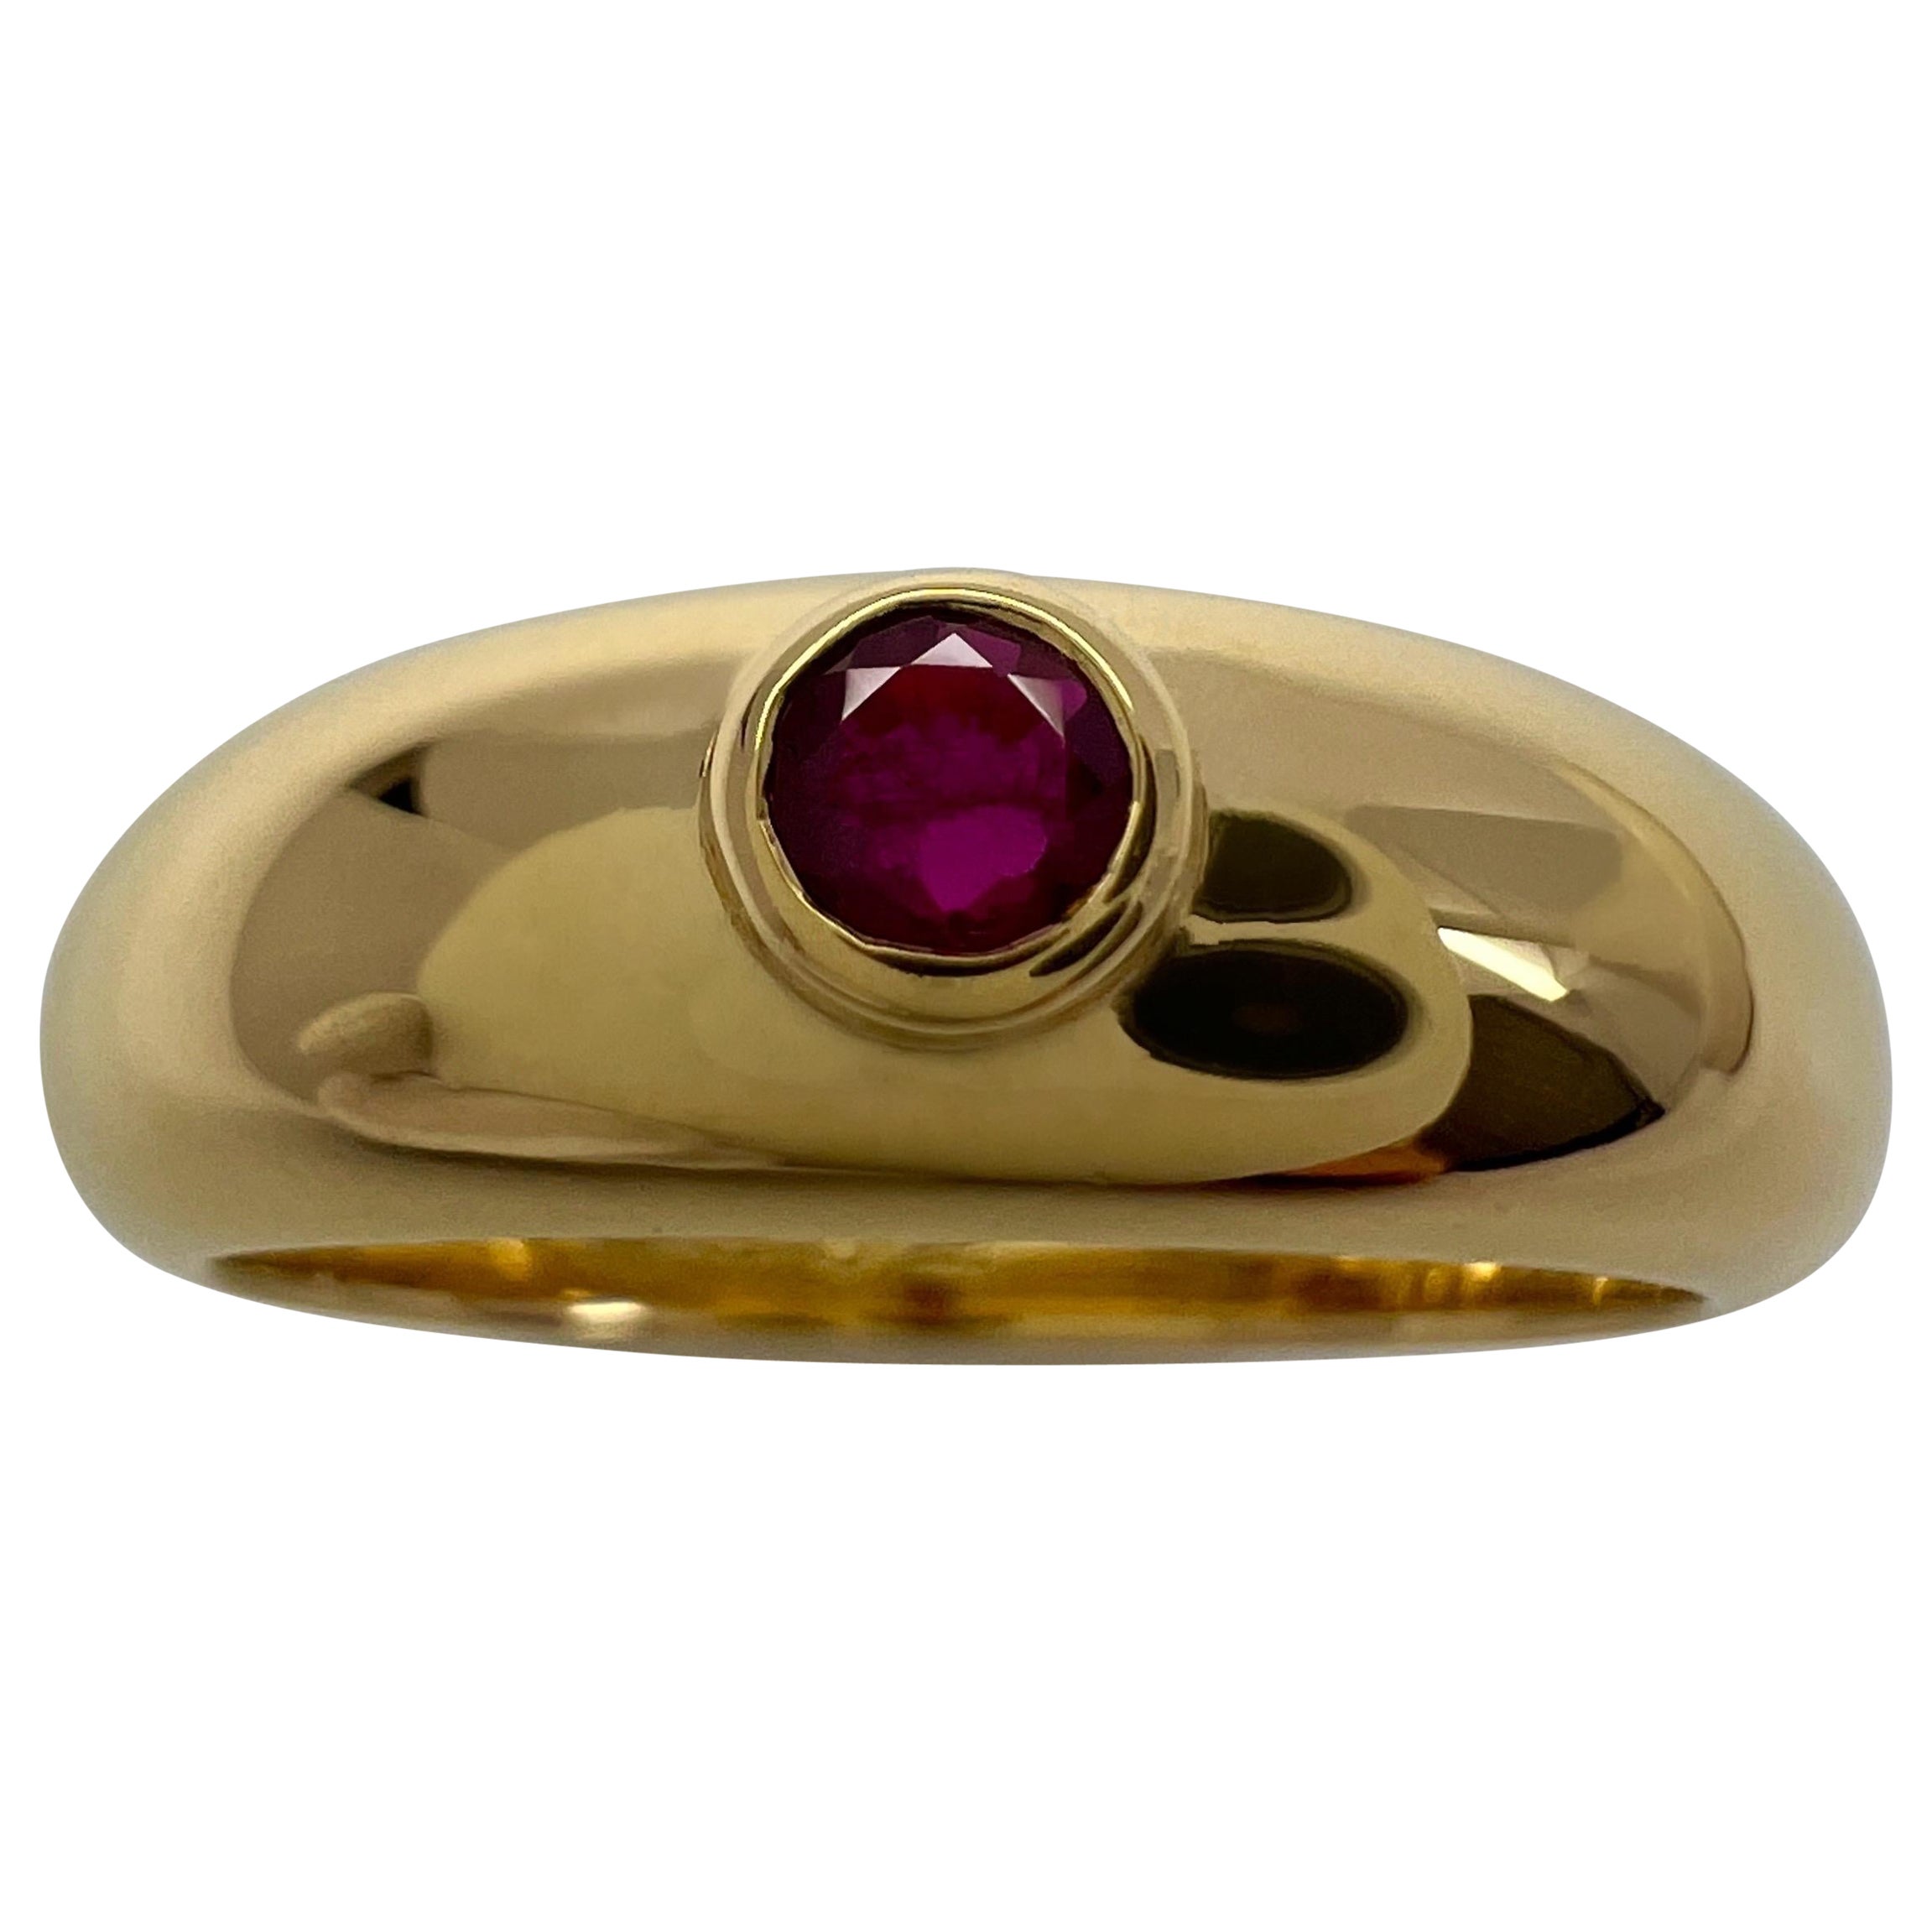 Vintage Cartier Round Cut Red Ruby 18k Yellow Gold Signet Style Domed Ring US5.5 For Sale